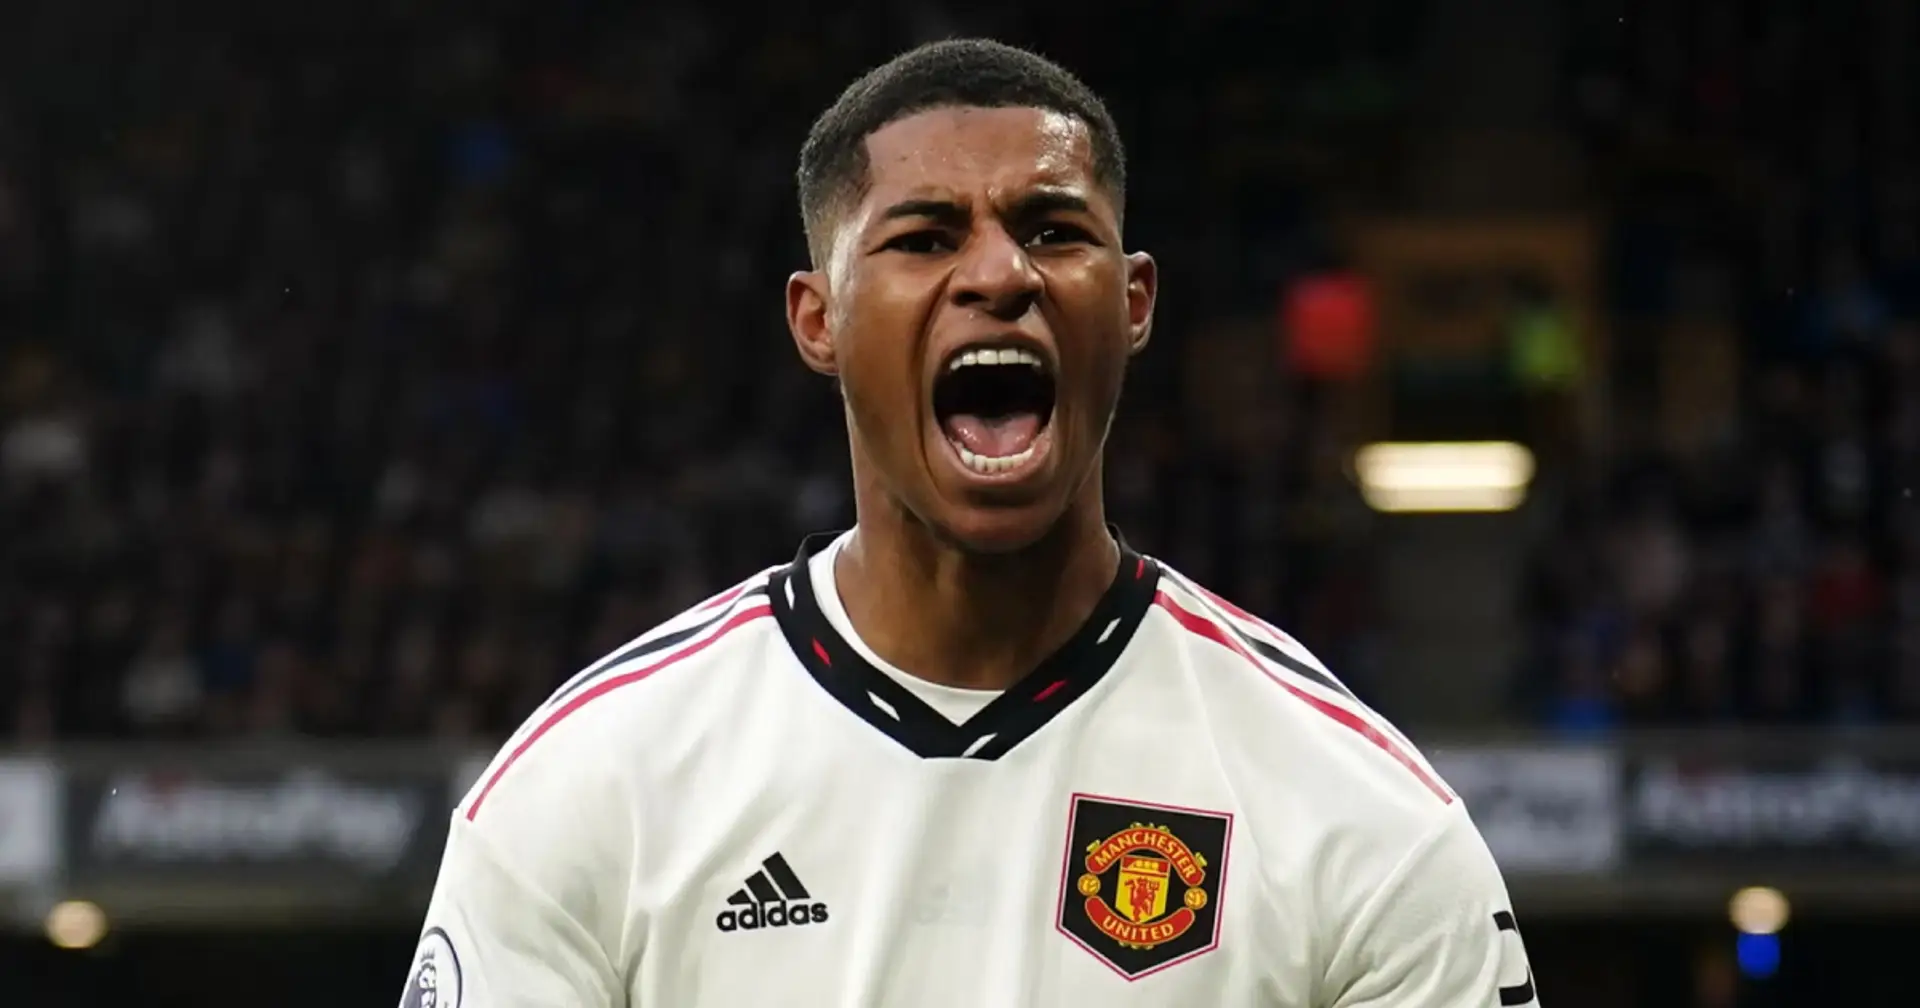 'Football narratives really can be great sometimes': Man United fans happy to see Rashford bounce back with Wolves goal